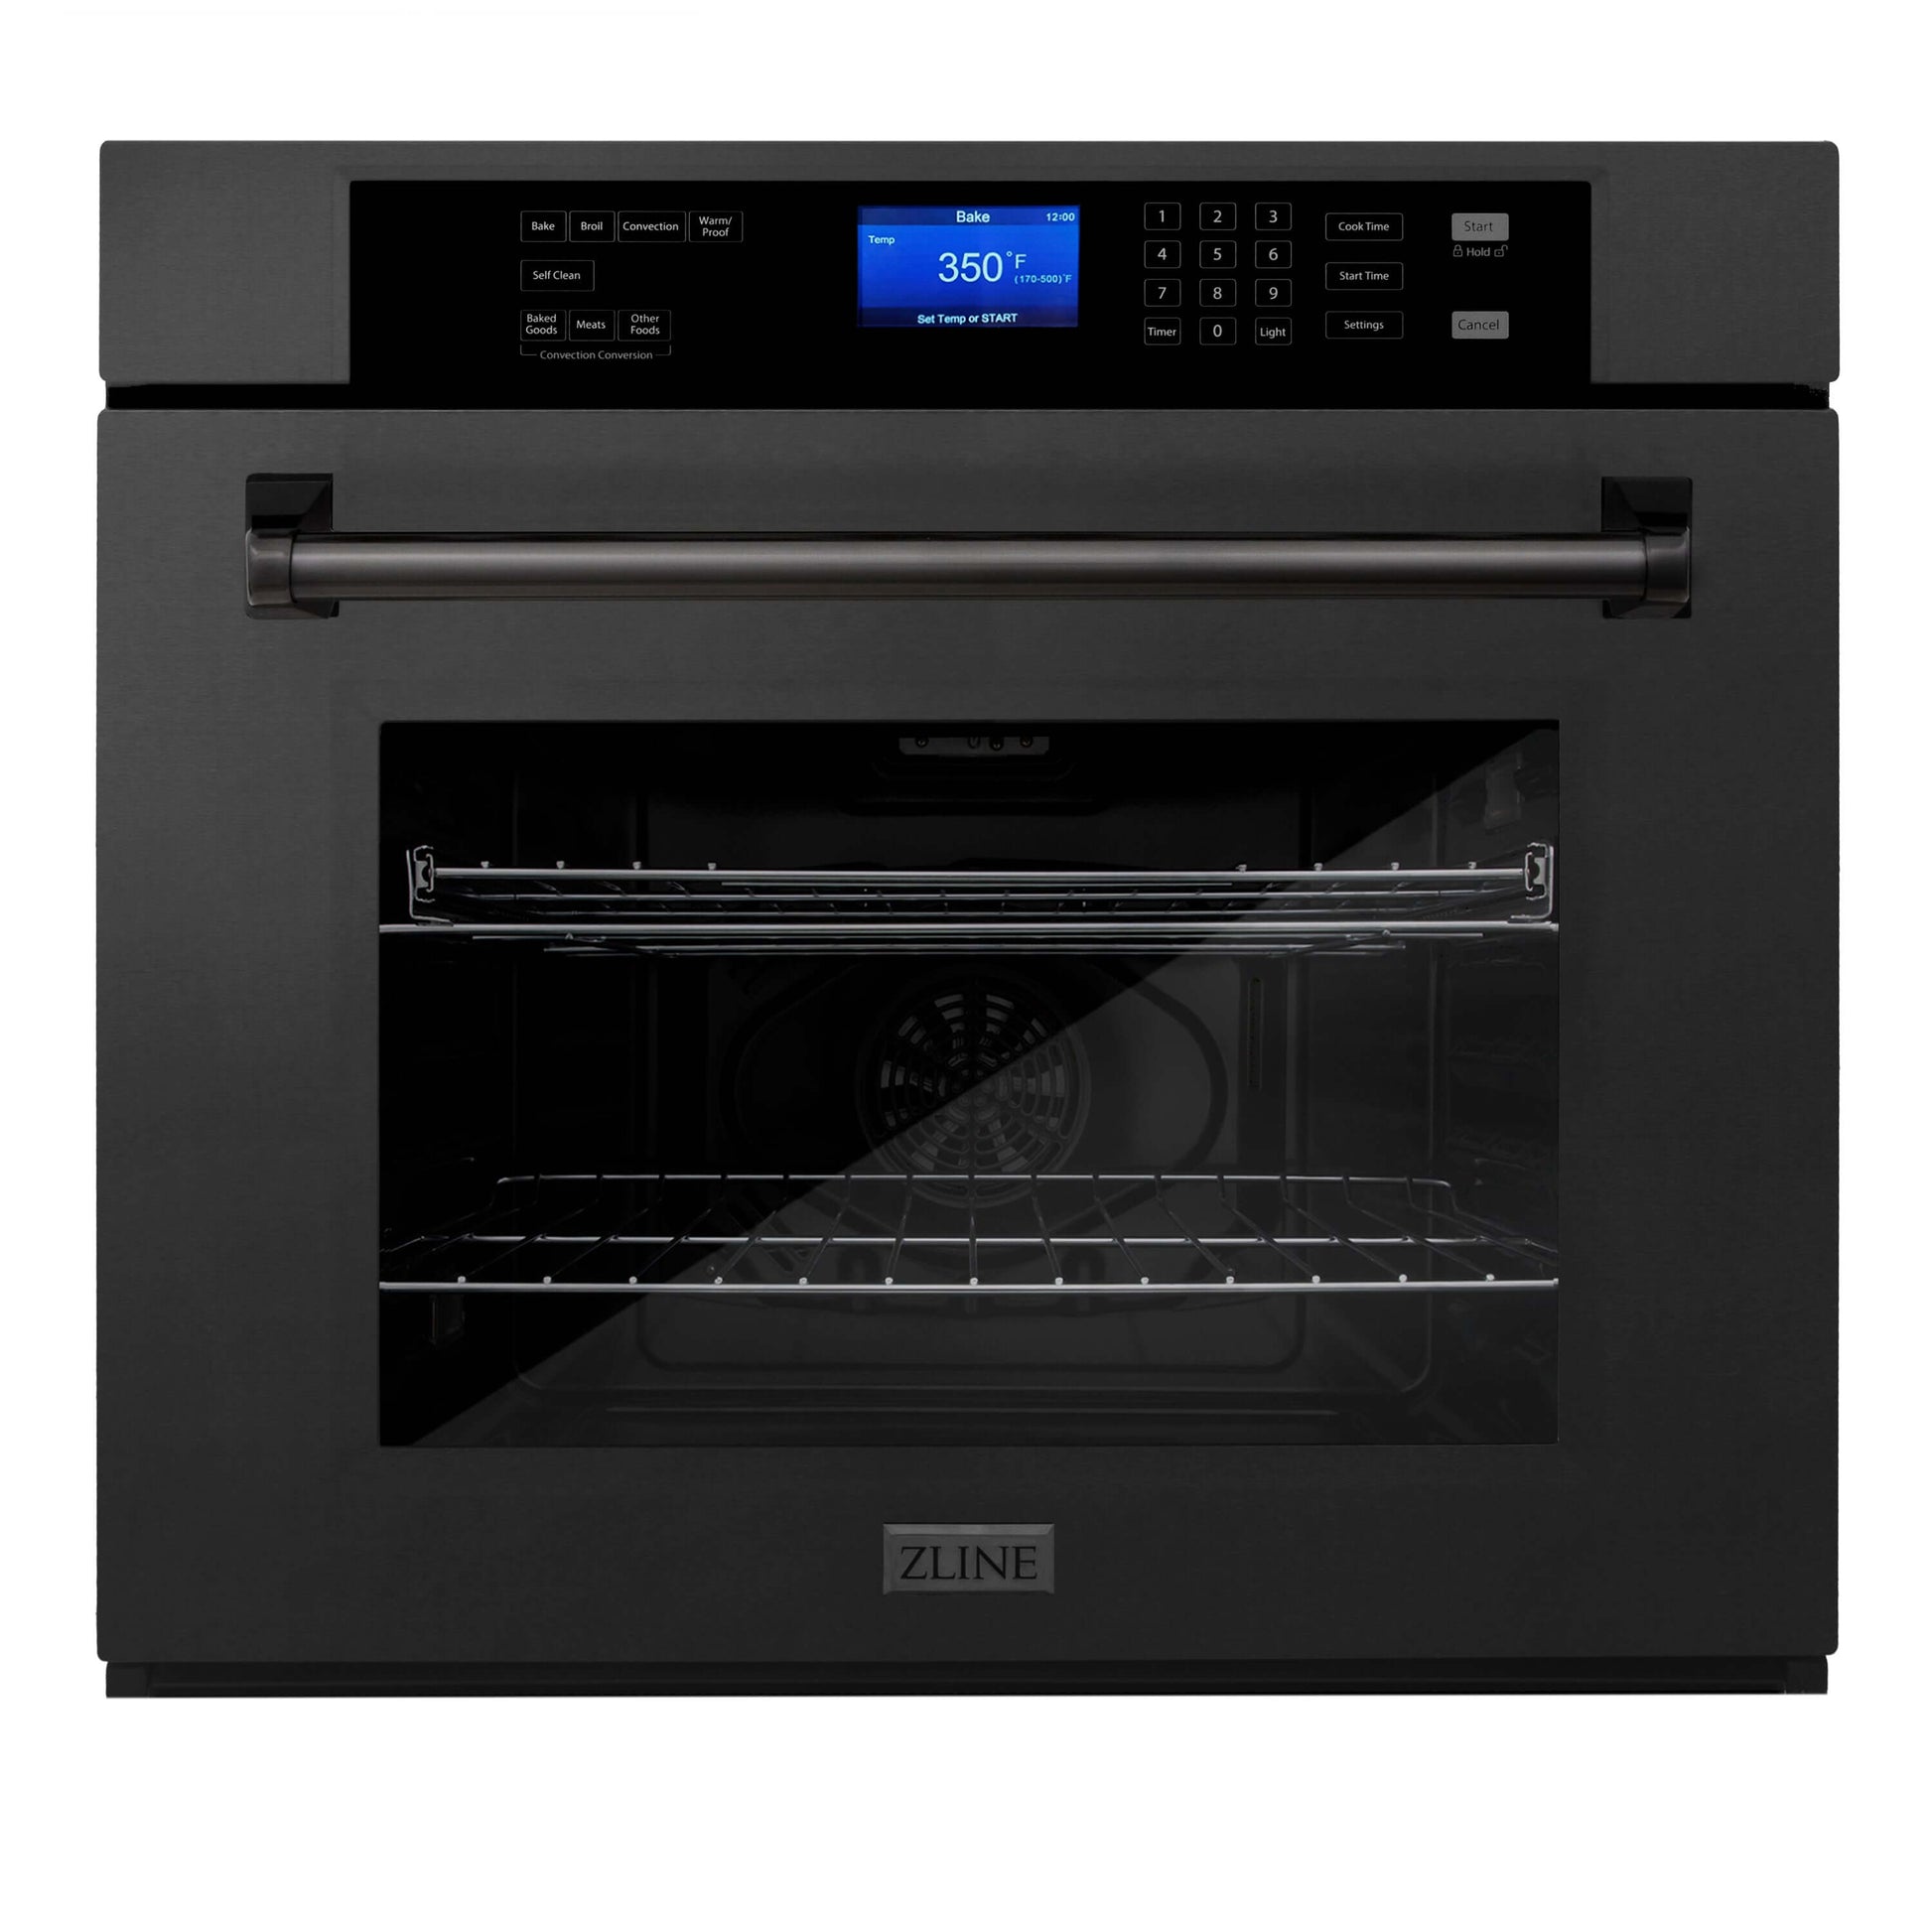 ZLINE 30 in. Professional Electric Single Wall Oven with Self Clean and True Convection in Black Stainless Steel (AWS-30-BS) front.